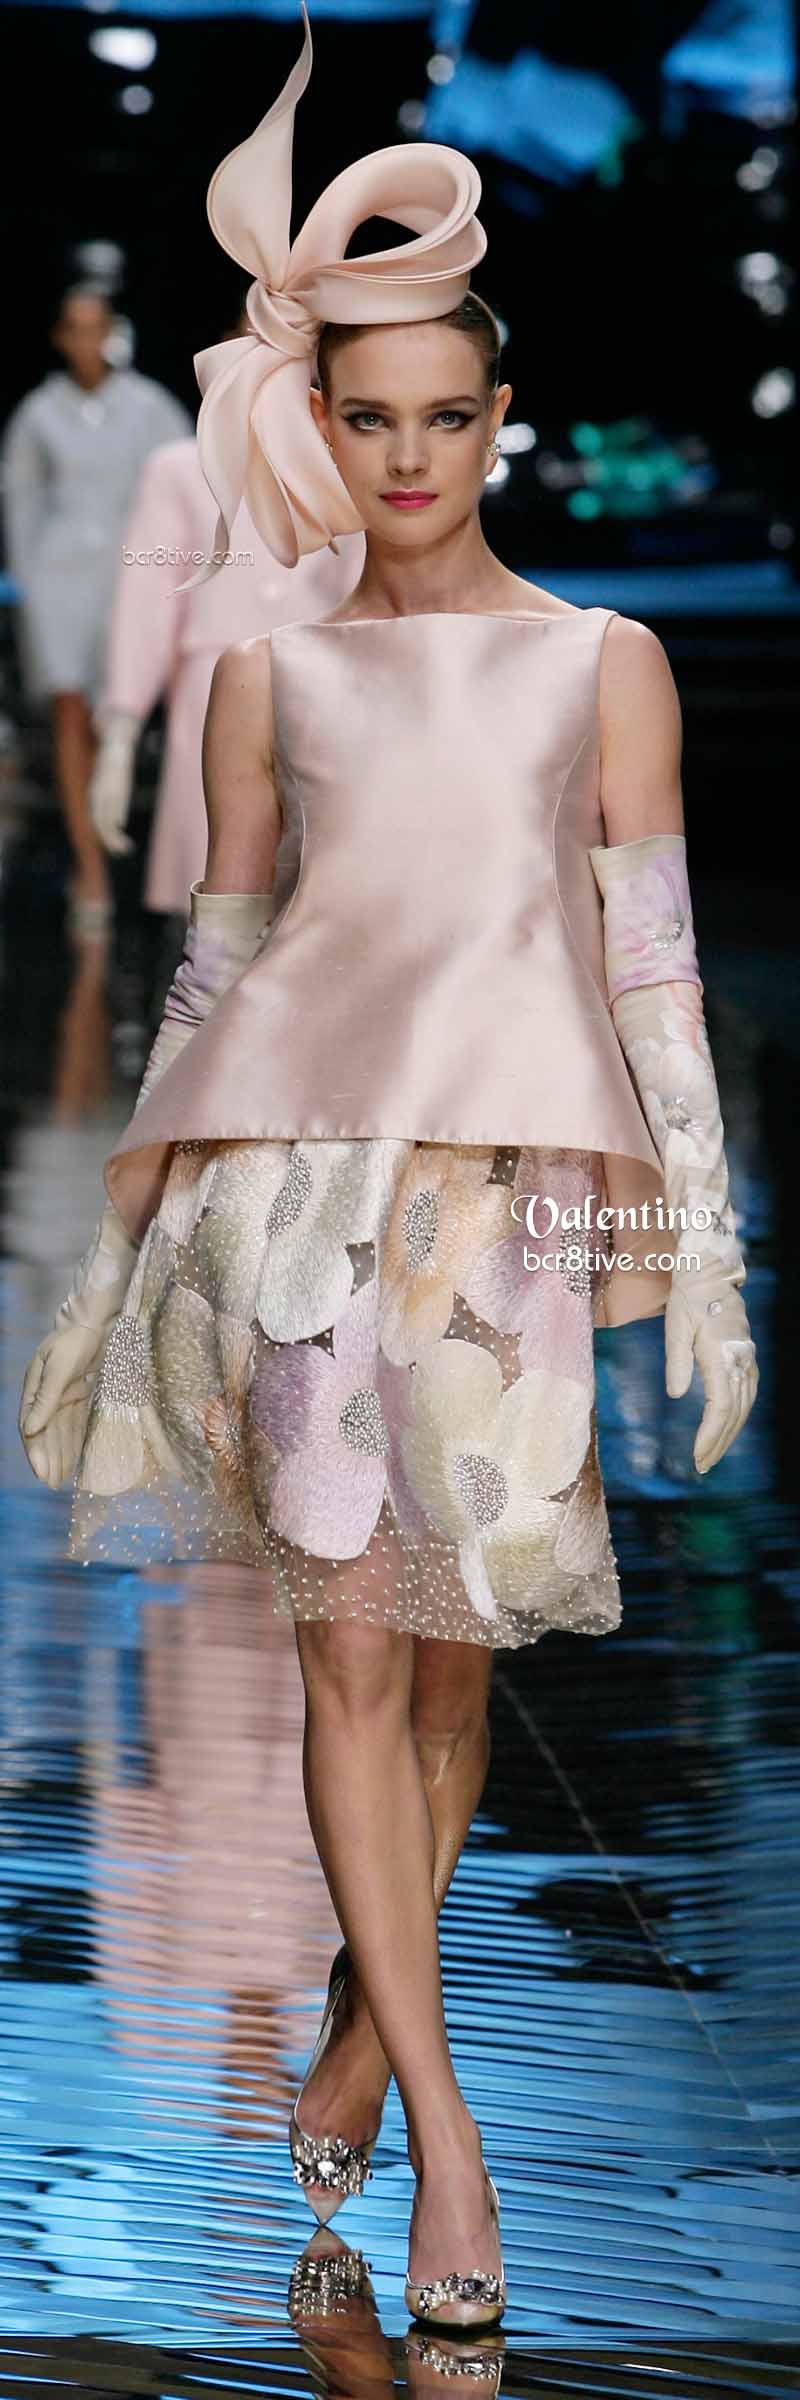 Valentino Pale Pink Skirt and Top with Bow Hat